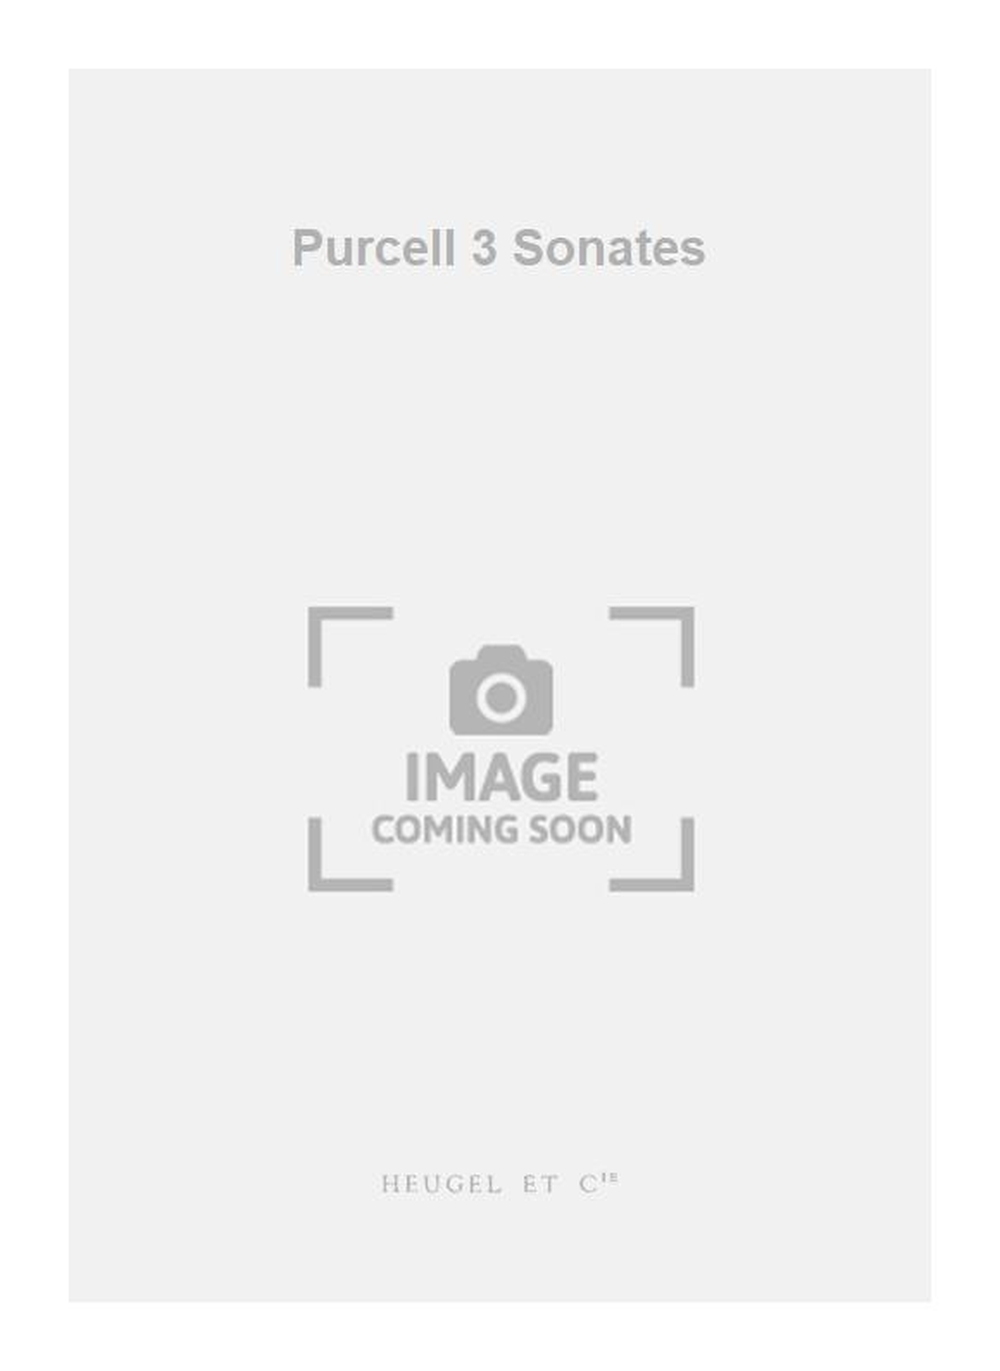 Daniel Purcell: Purcell 3 Sonates